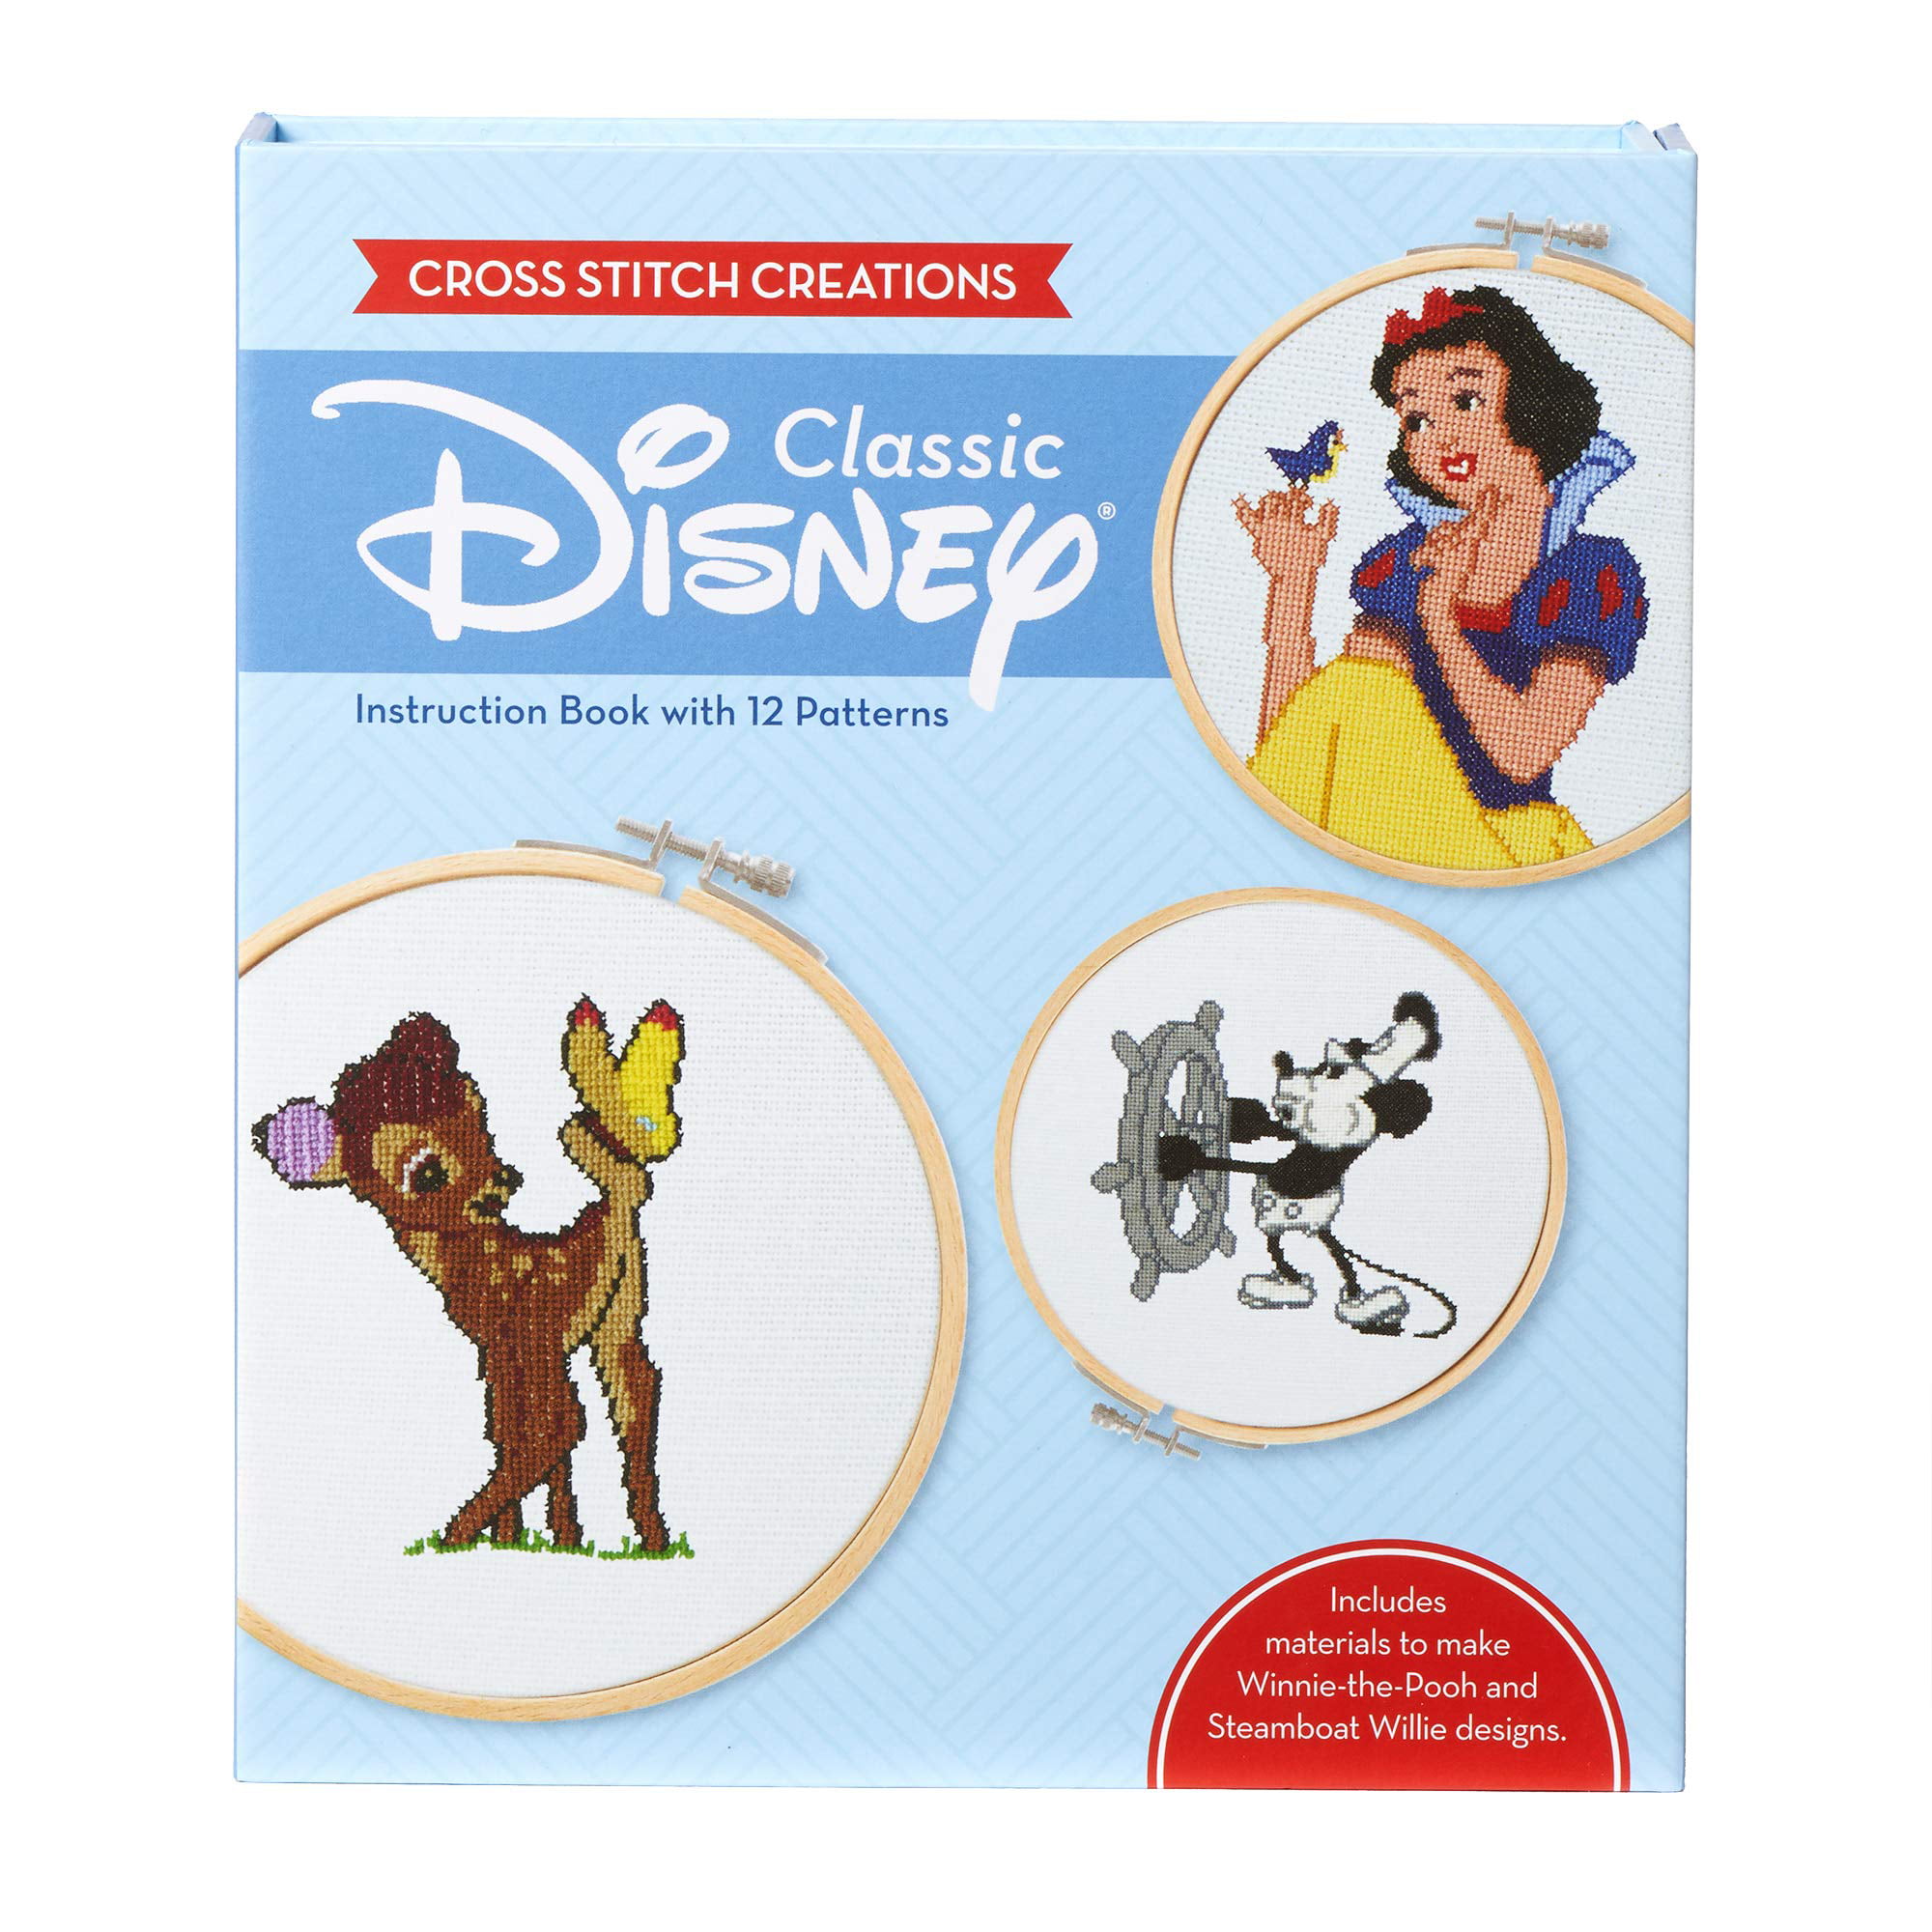 Walt Disney Characters Needlepoint Book: Embroideries and Needlework Instruction [Book]